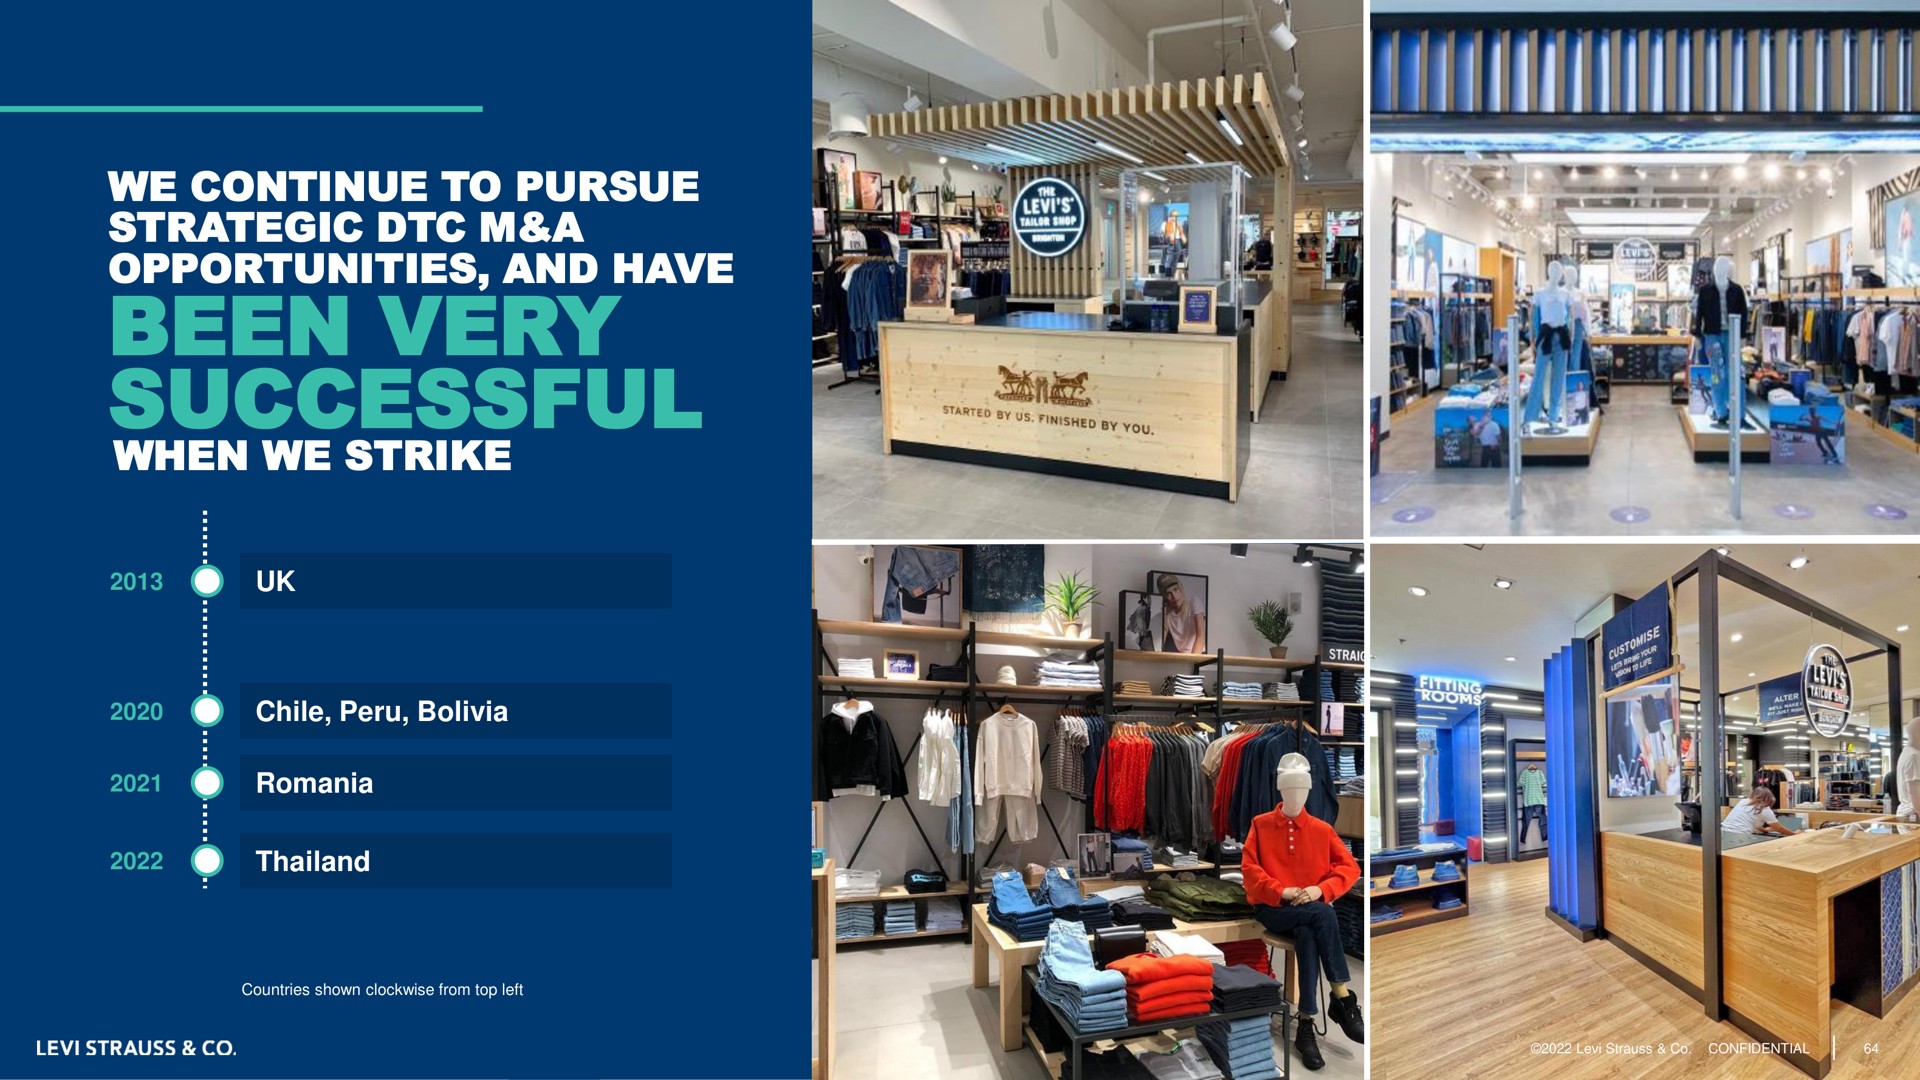 we continue to pursue strategic a opportunities and have been very successful when we strike at be | Levi Strauss